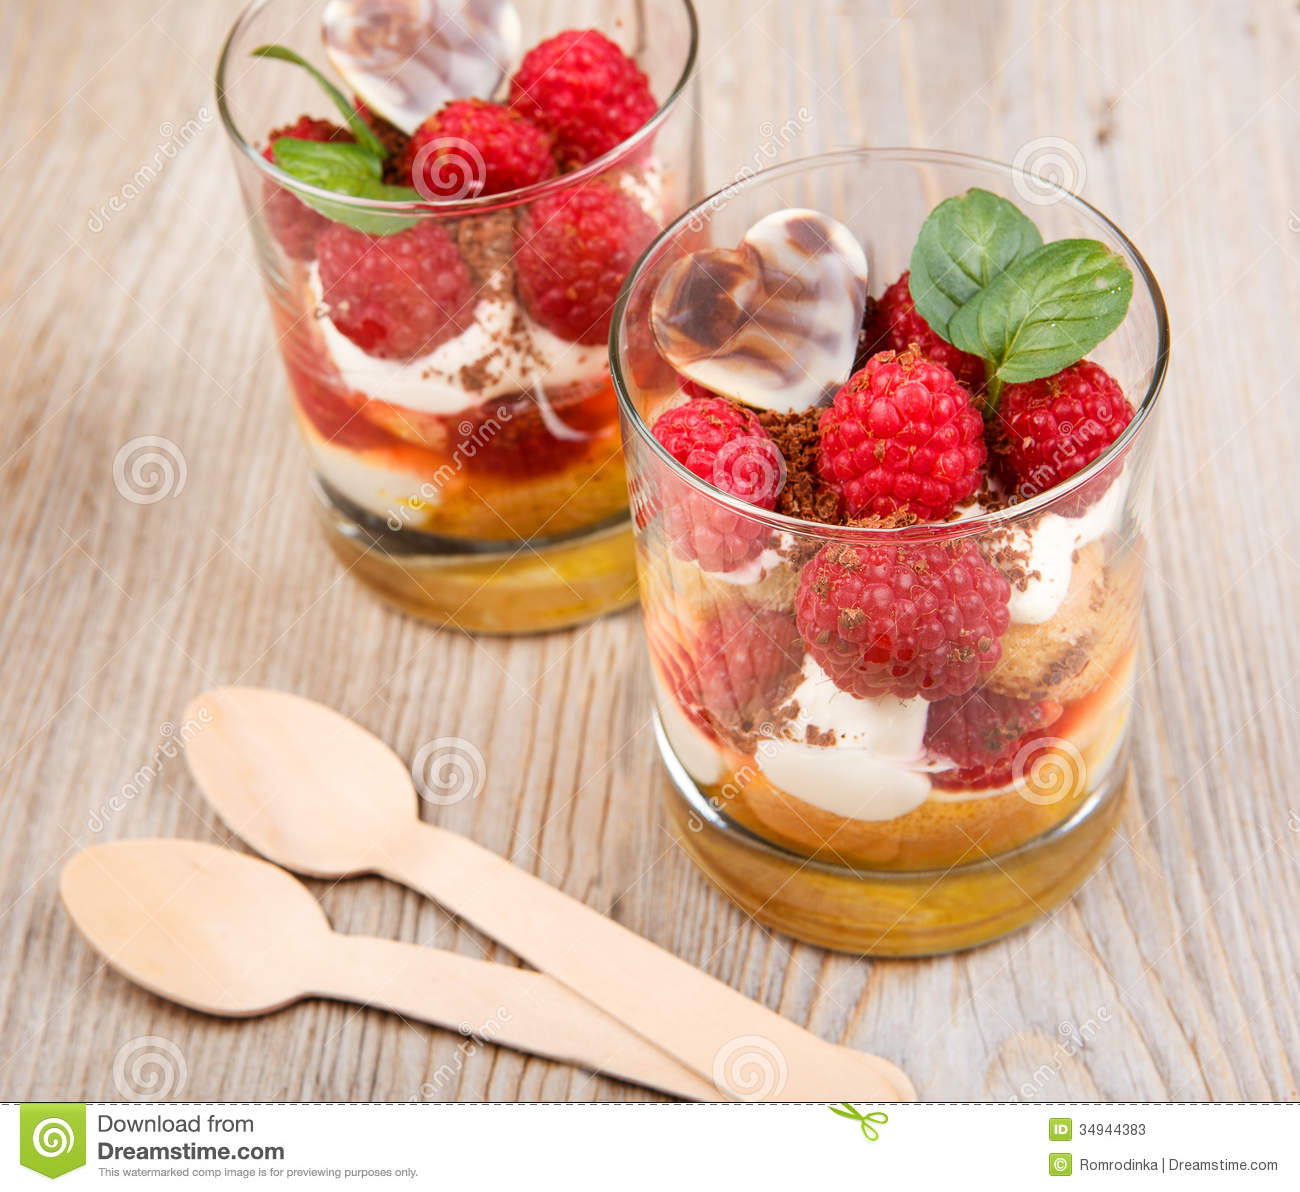 Fresh Raspberry Dessert
 Fresh Raspberry Dessert With Biscuit Stock Image Image